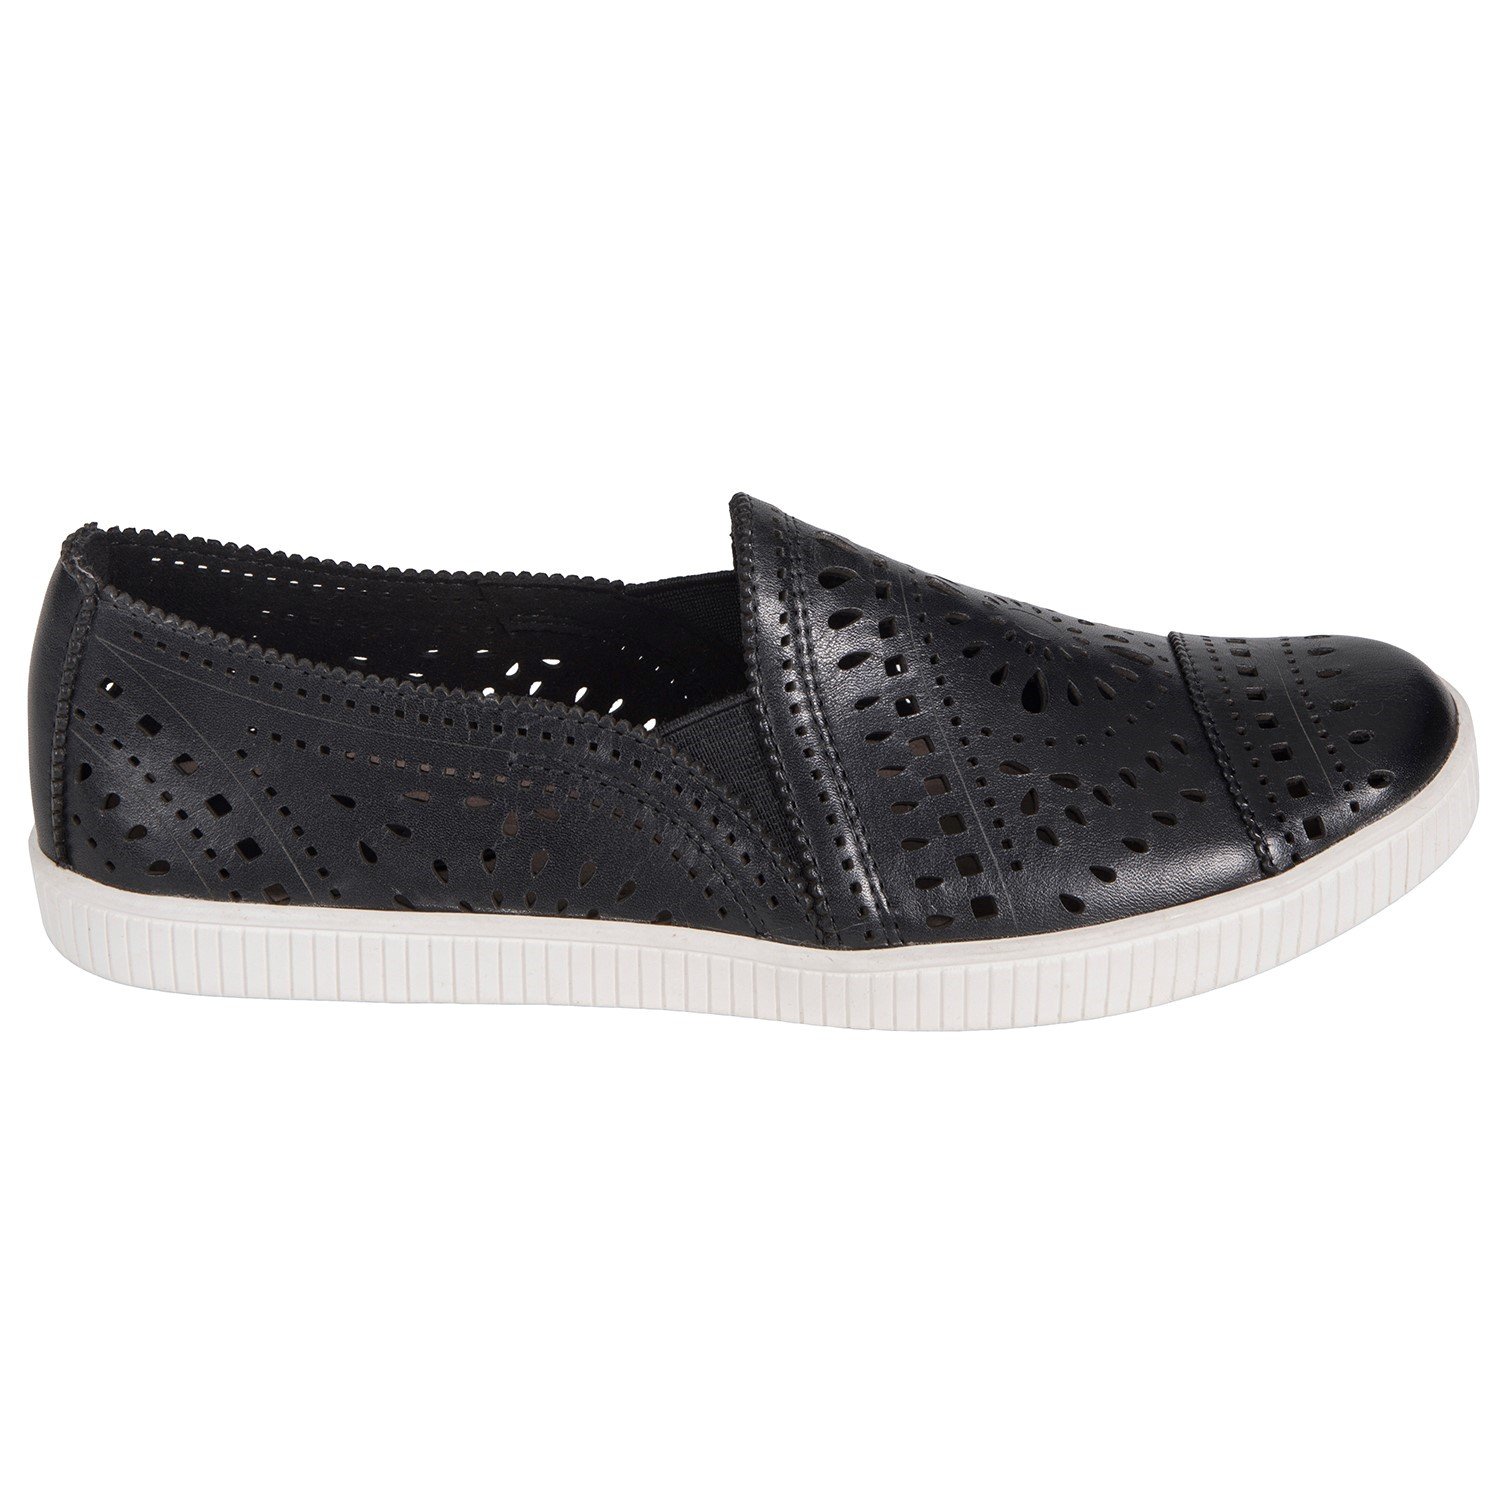 Earth Tayberry - Women's Slip-on Casual 